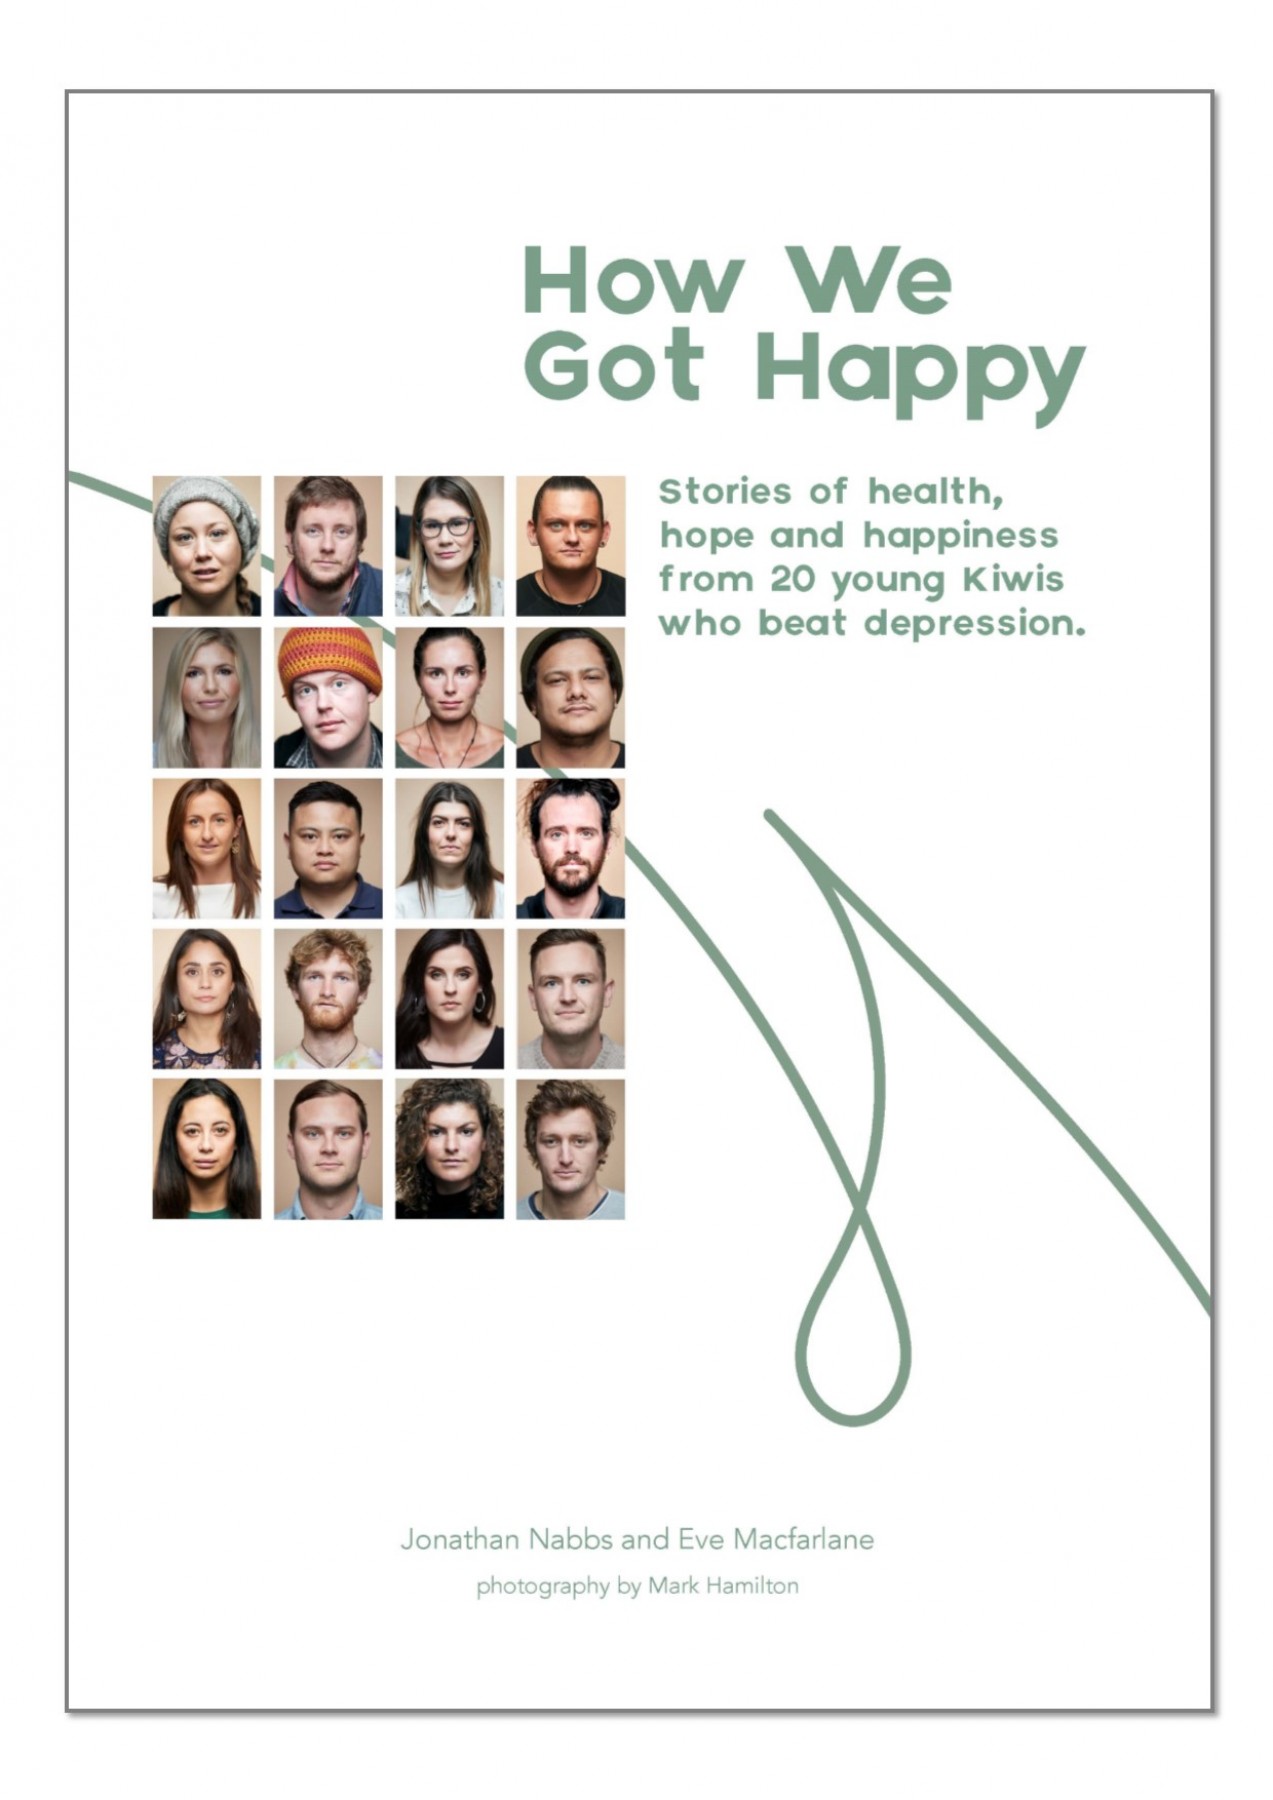 How we got happy: Stories of health, hope and happiness from 20 young Kiwis who beat depression